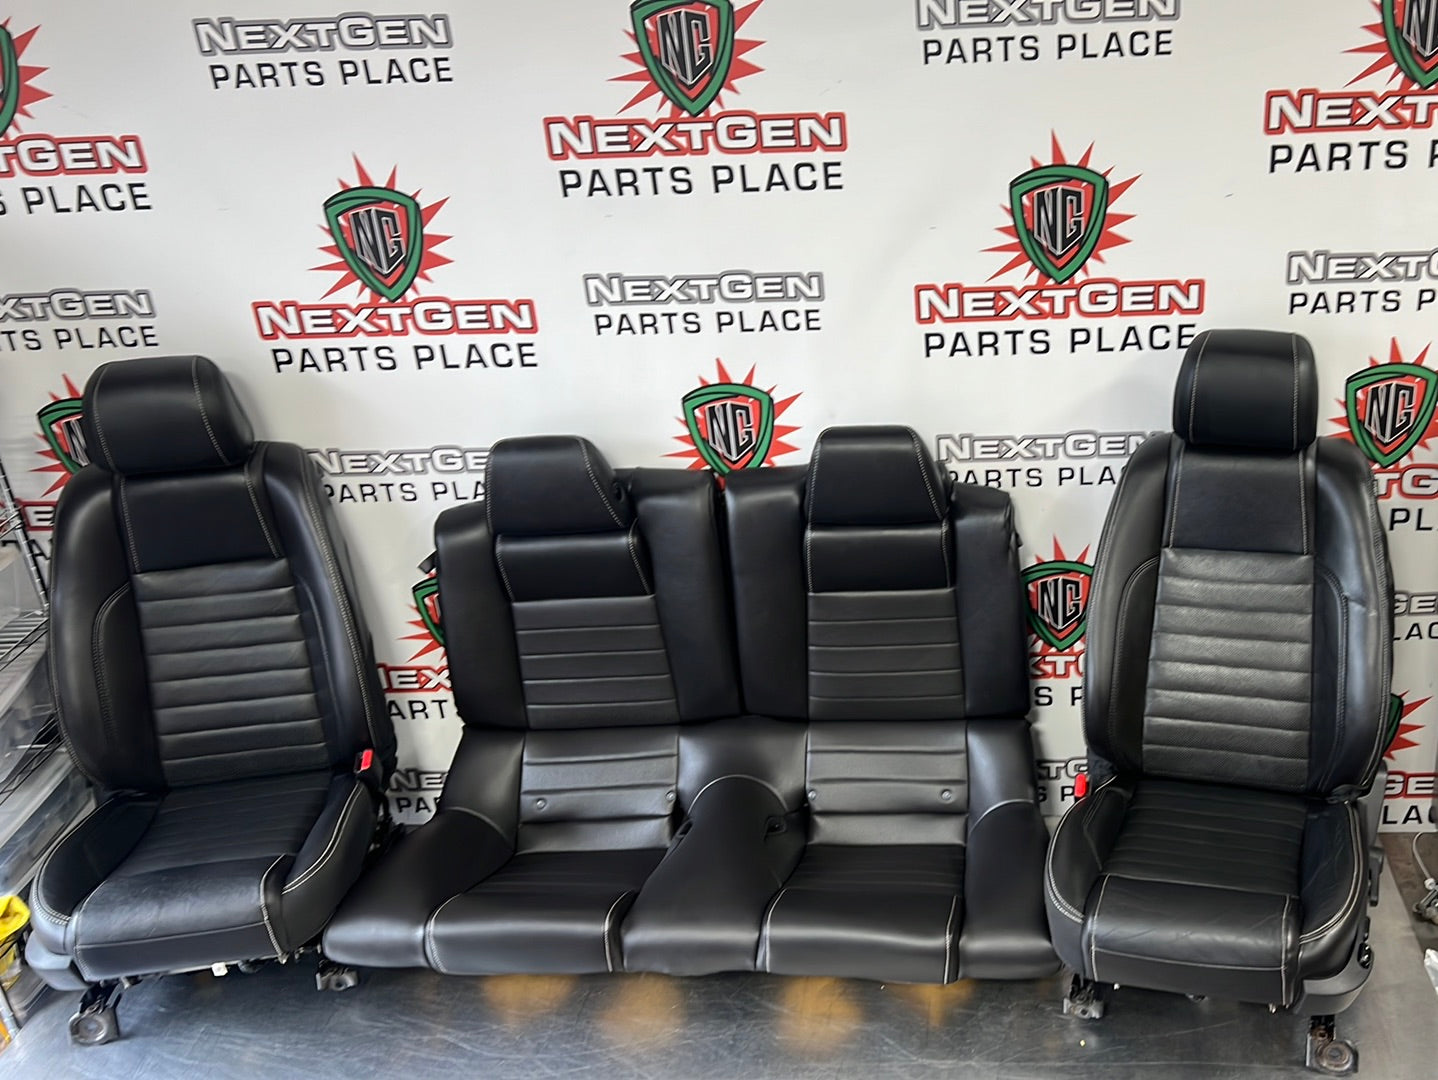 AND #22 LEATHER NextGenPartsPlace 13-14 REAR OEM SET SEATS – GT MUSTANG FORD PREMIUM FRONT